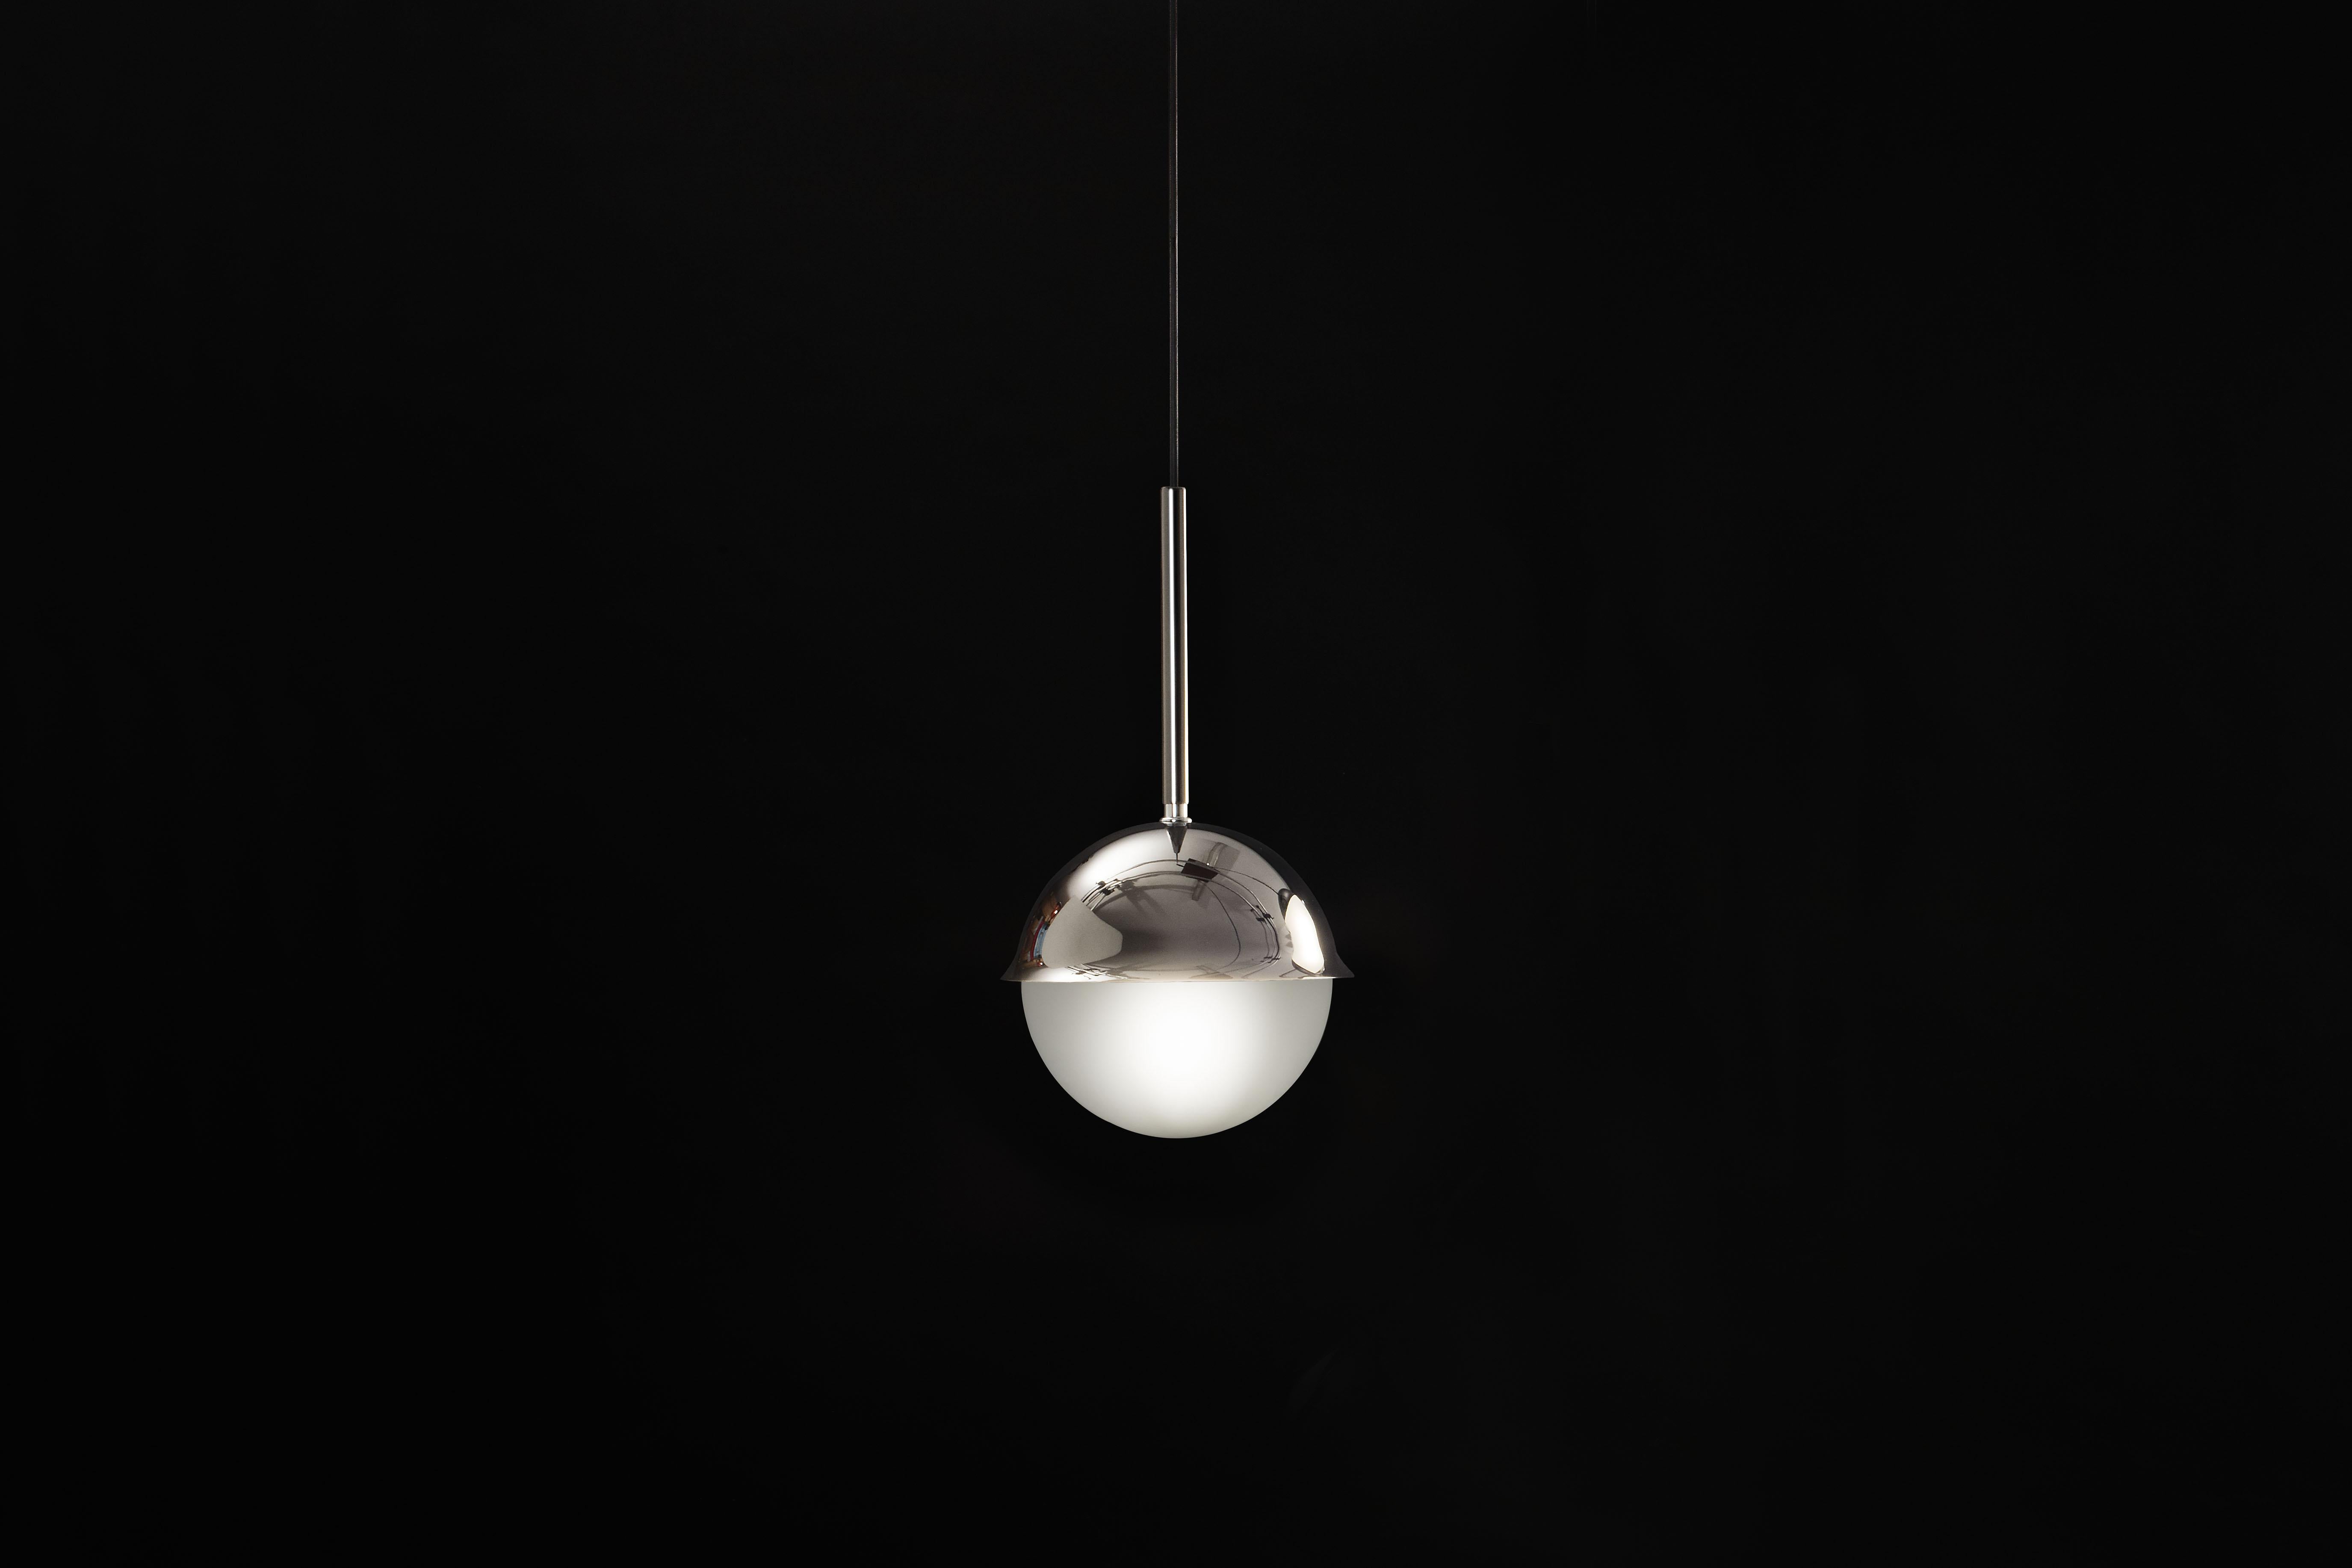 Netta Sospensione pendant lamp in black chrome and satin glass for Tato Italia. Designed by Antonia Astori in 2017. Executed in black chrome, iron, brass and glass.

Price is per item. Available to order in unlimited quantities.

In stock lead